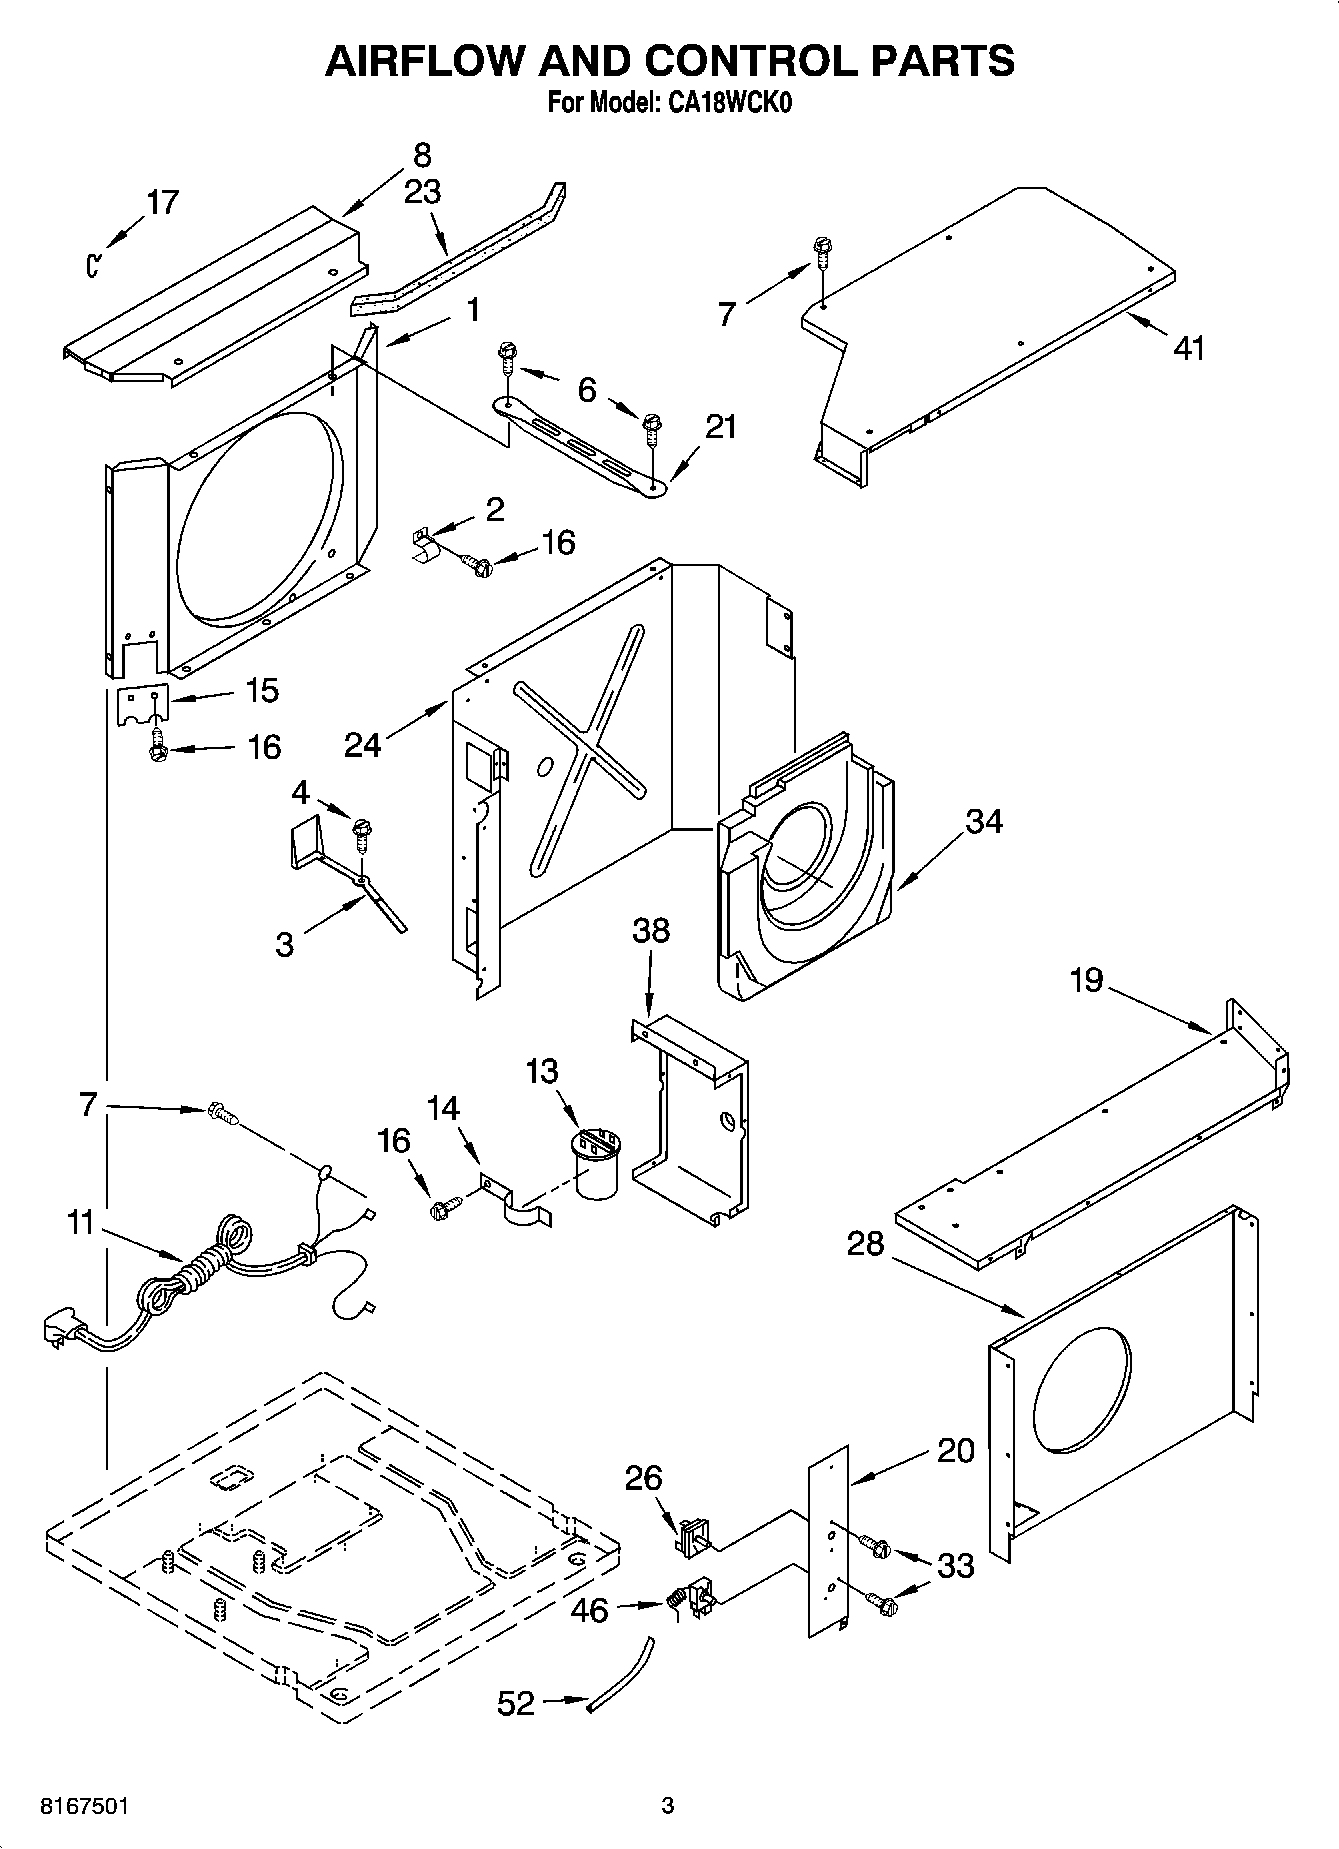 02 - AIRFLOW AND CONTROL PARTS